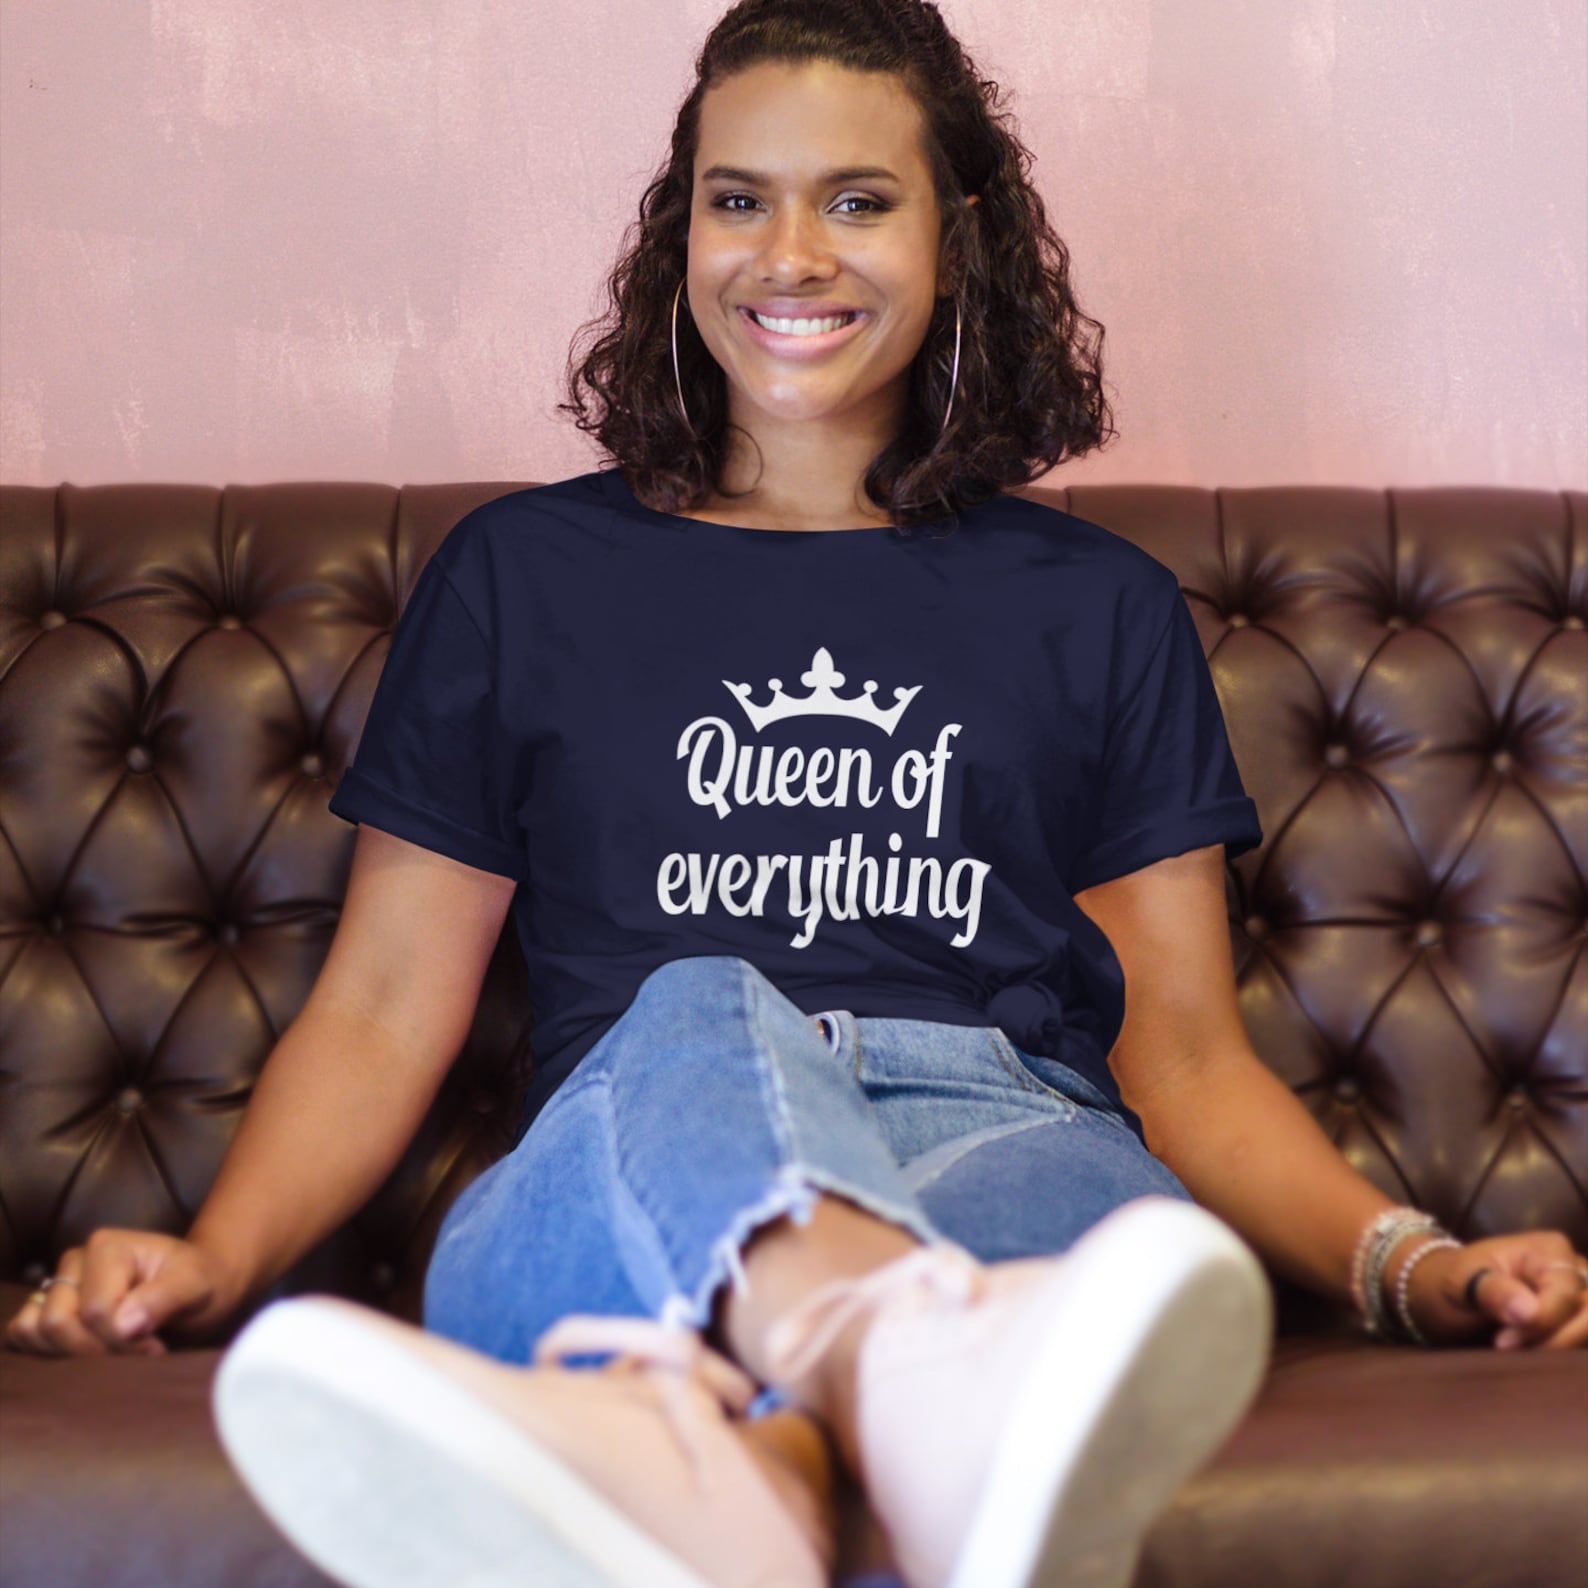 Queen of everything T-shirt boss lady queenie funny tshirt | Etsy